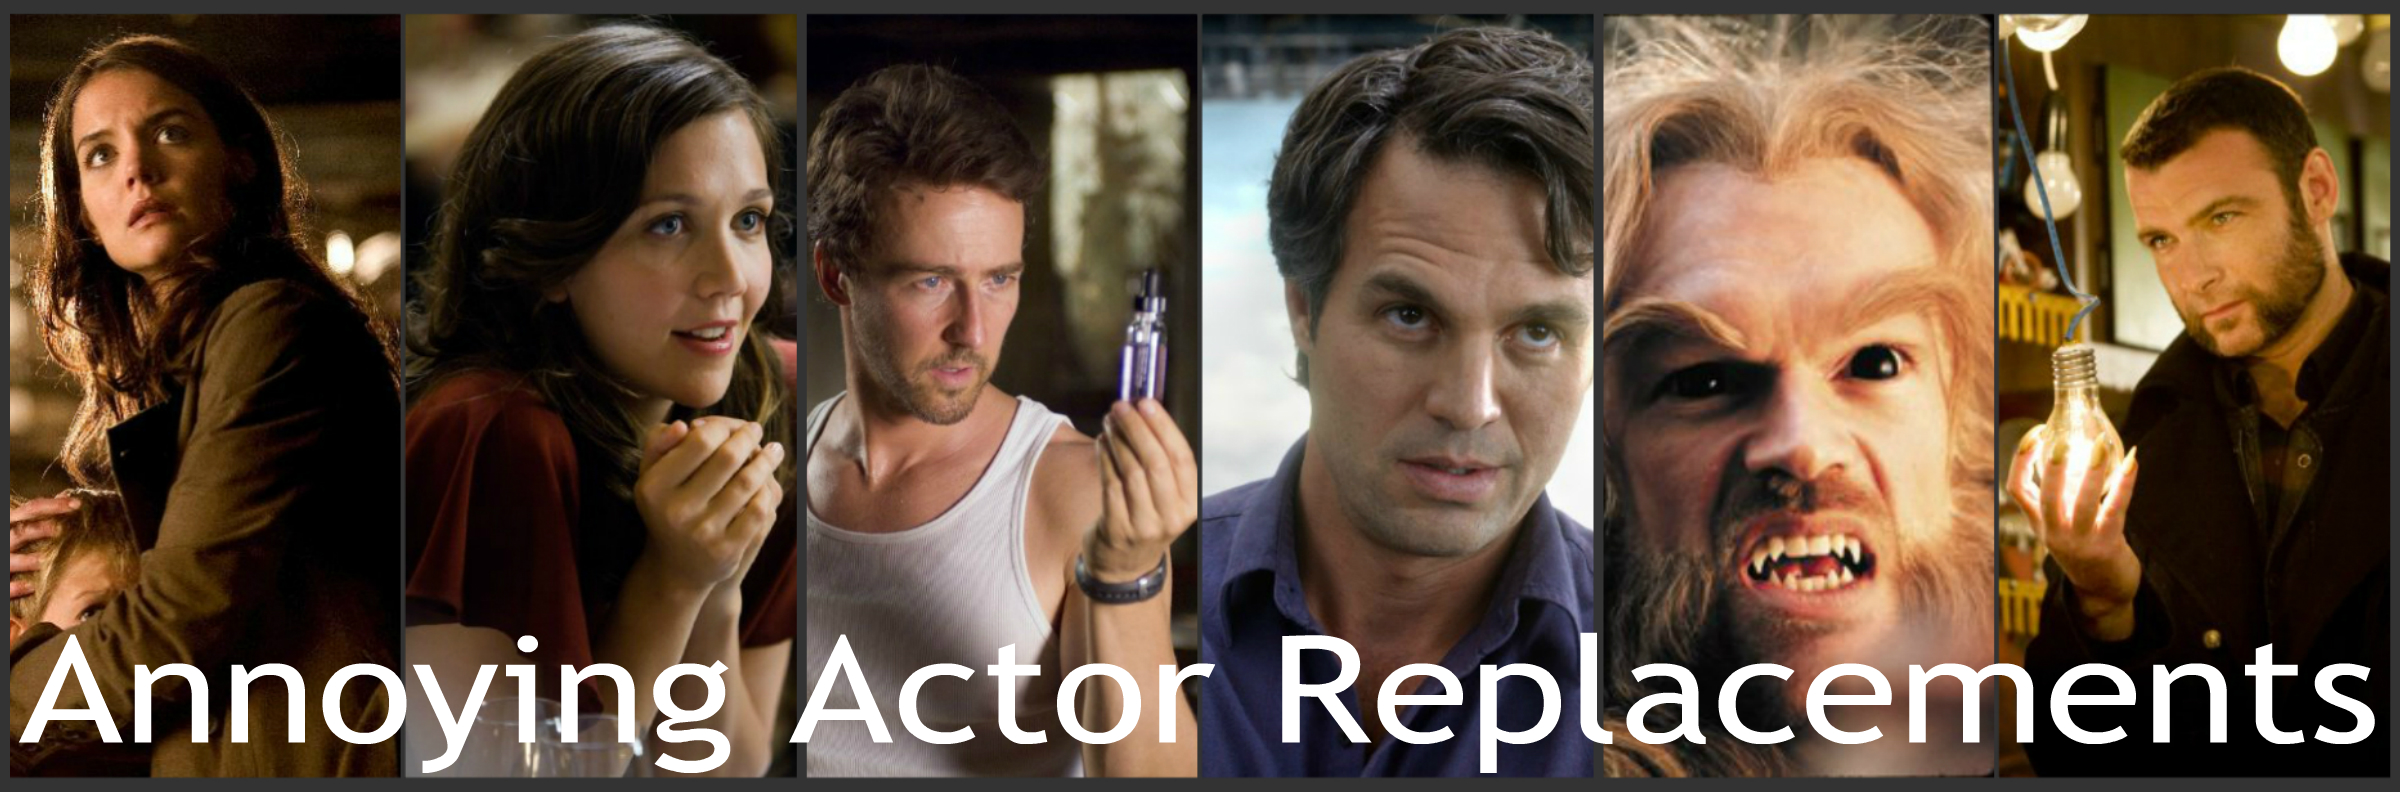 Annoying Actor Replacements « Celebrity Gossip and Movie News